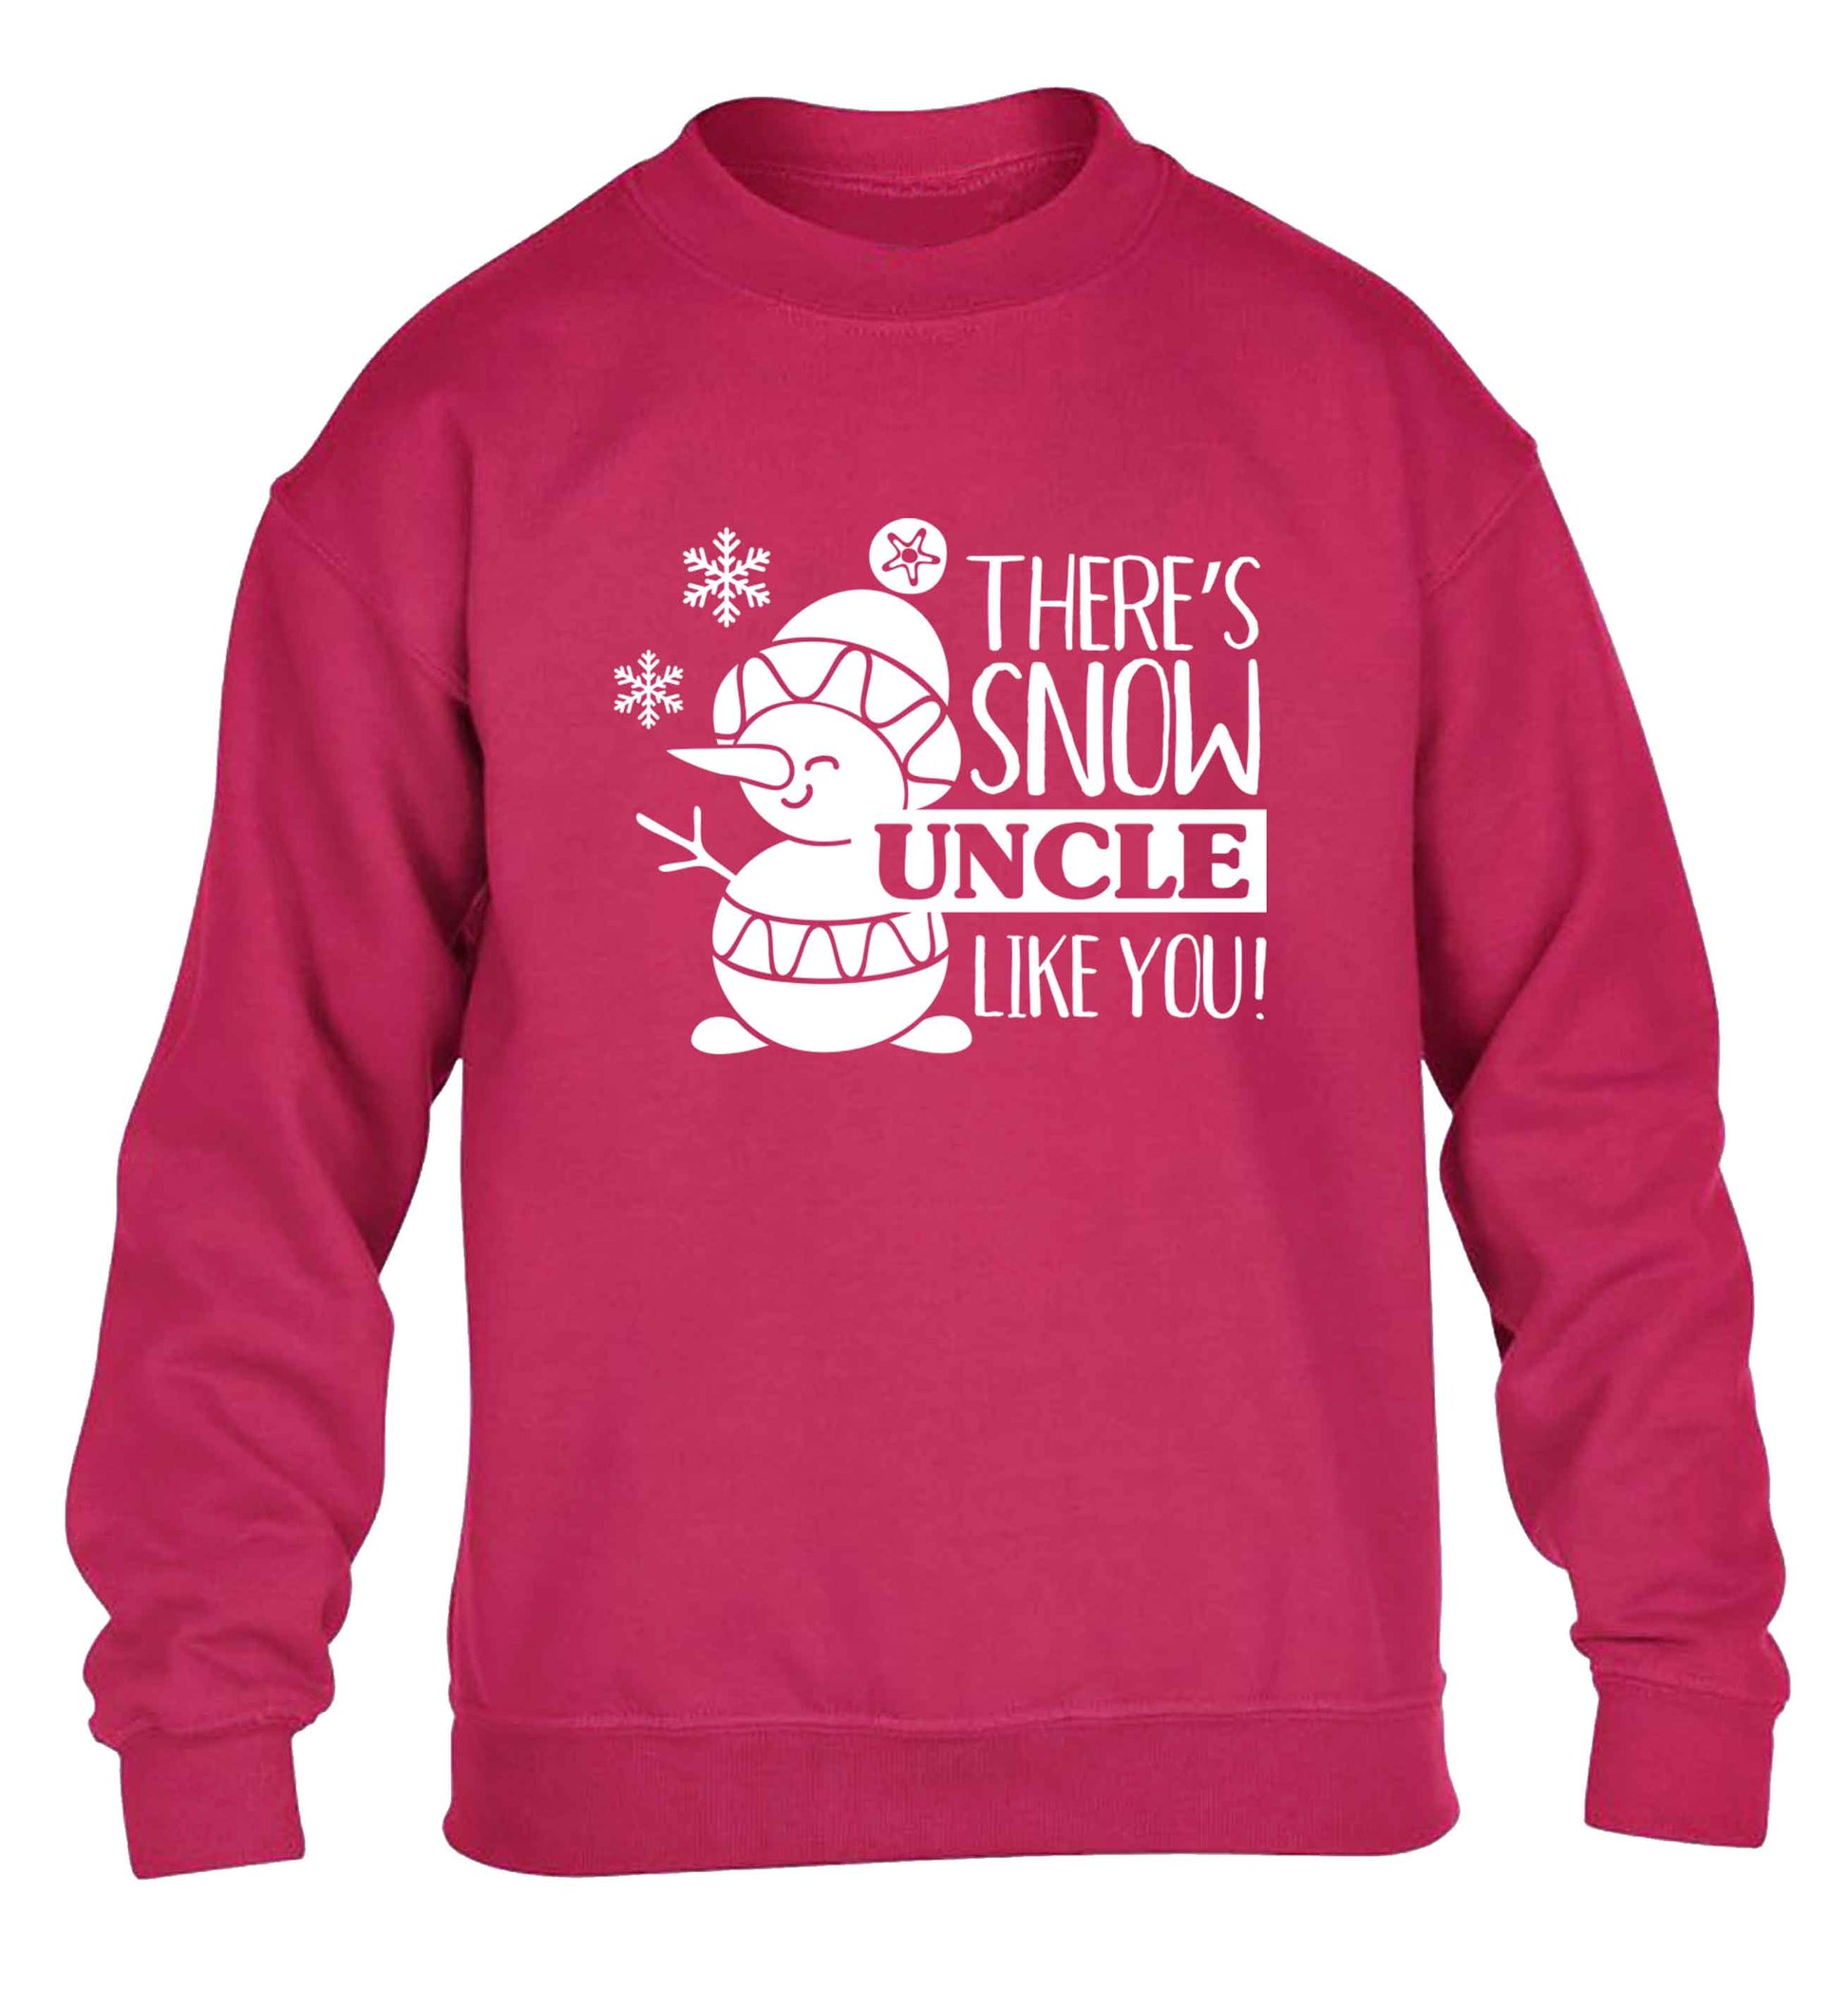 There's snow uncle like you children's pink sweater 12-13 Years